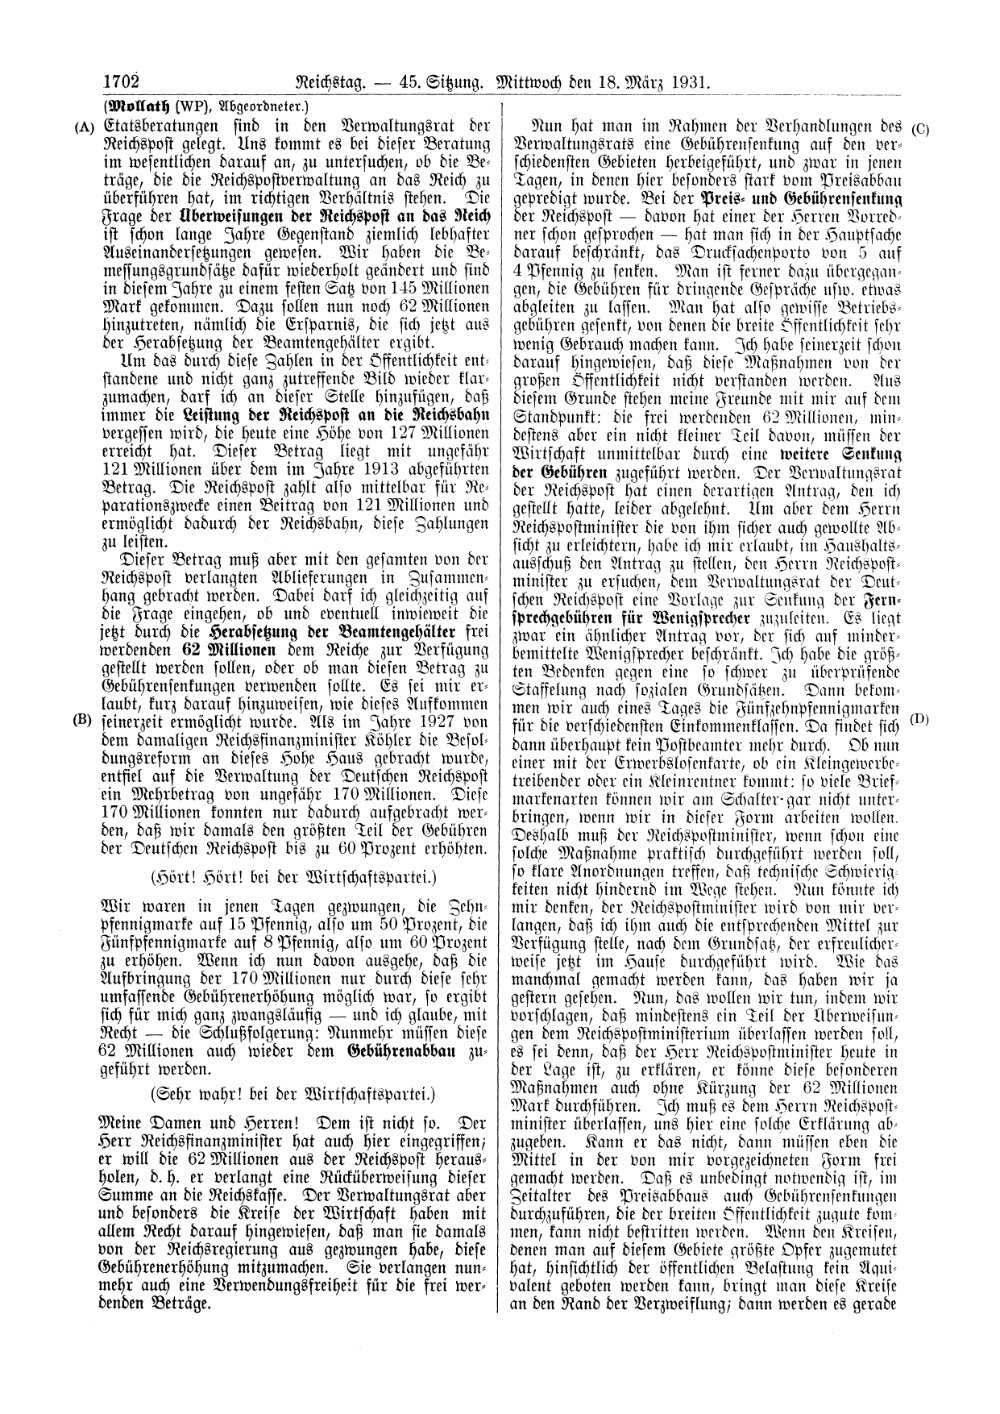 Scan of page 1702